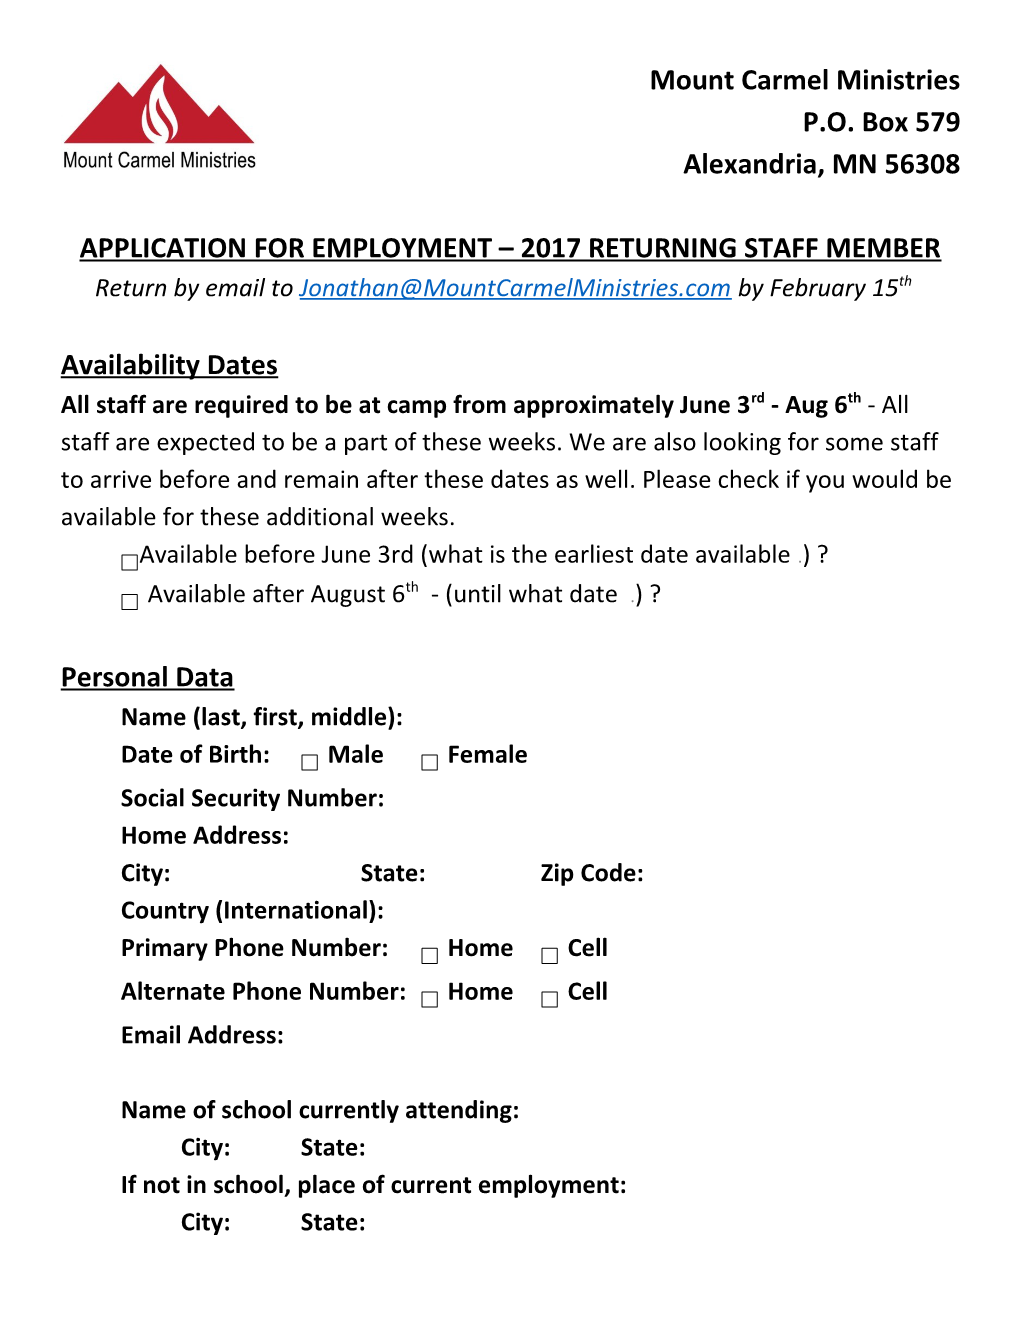 Application for Employment 2017Returning Staff Member